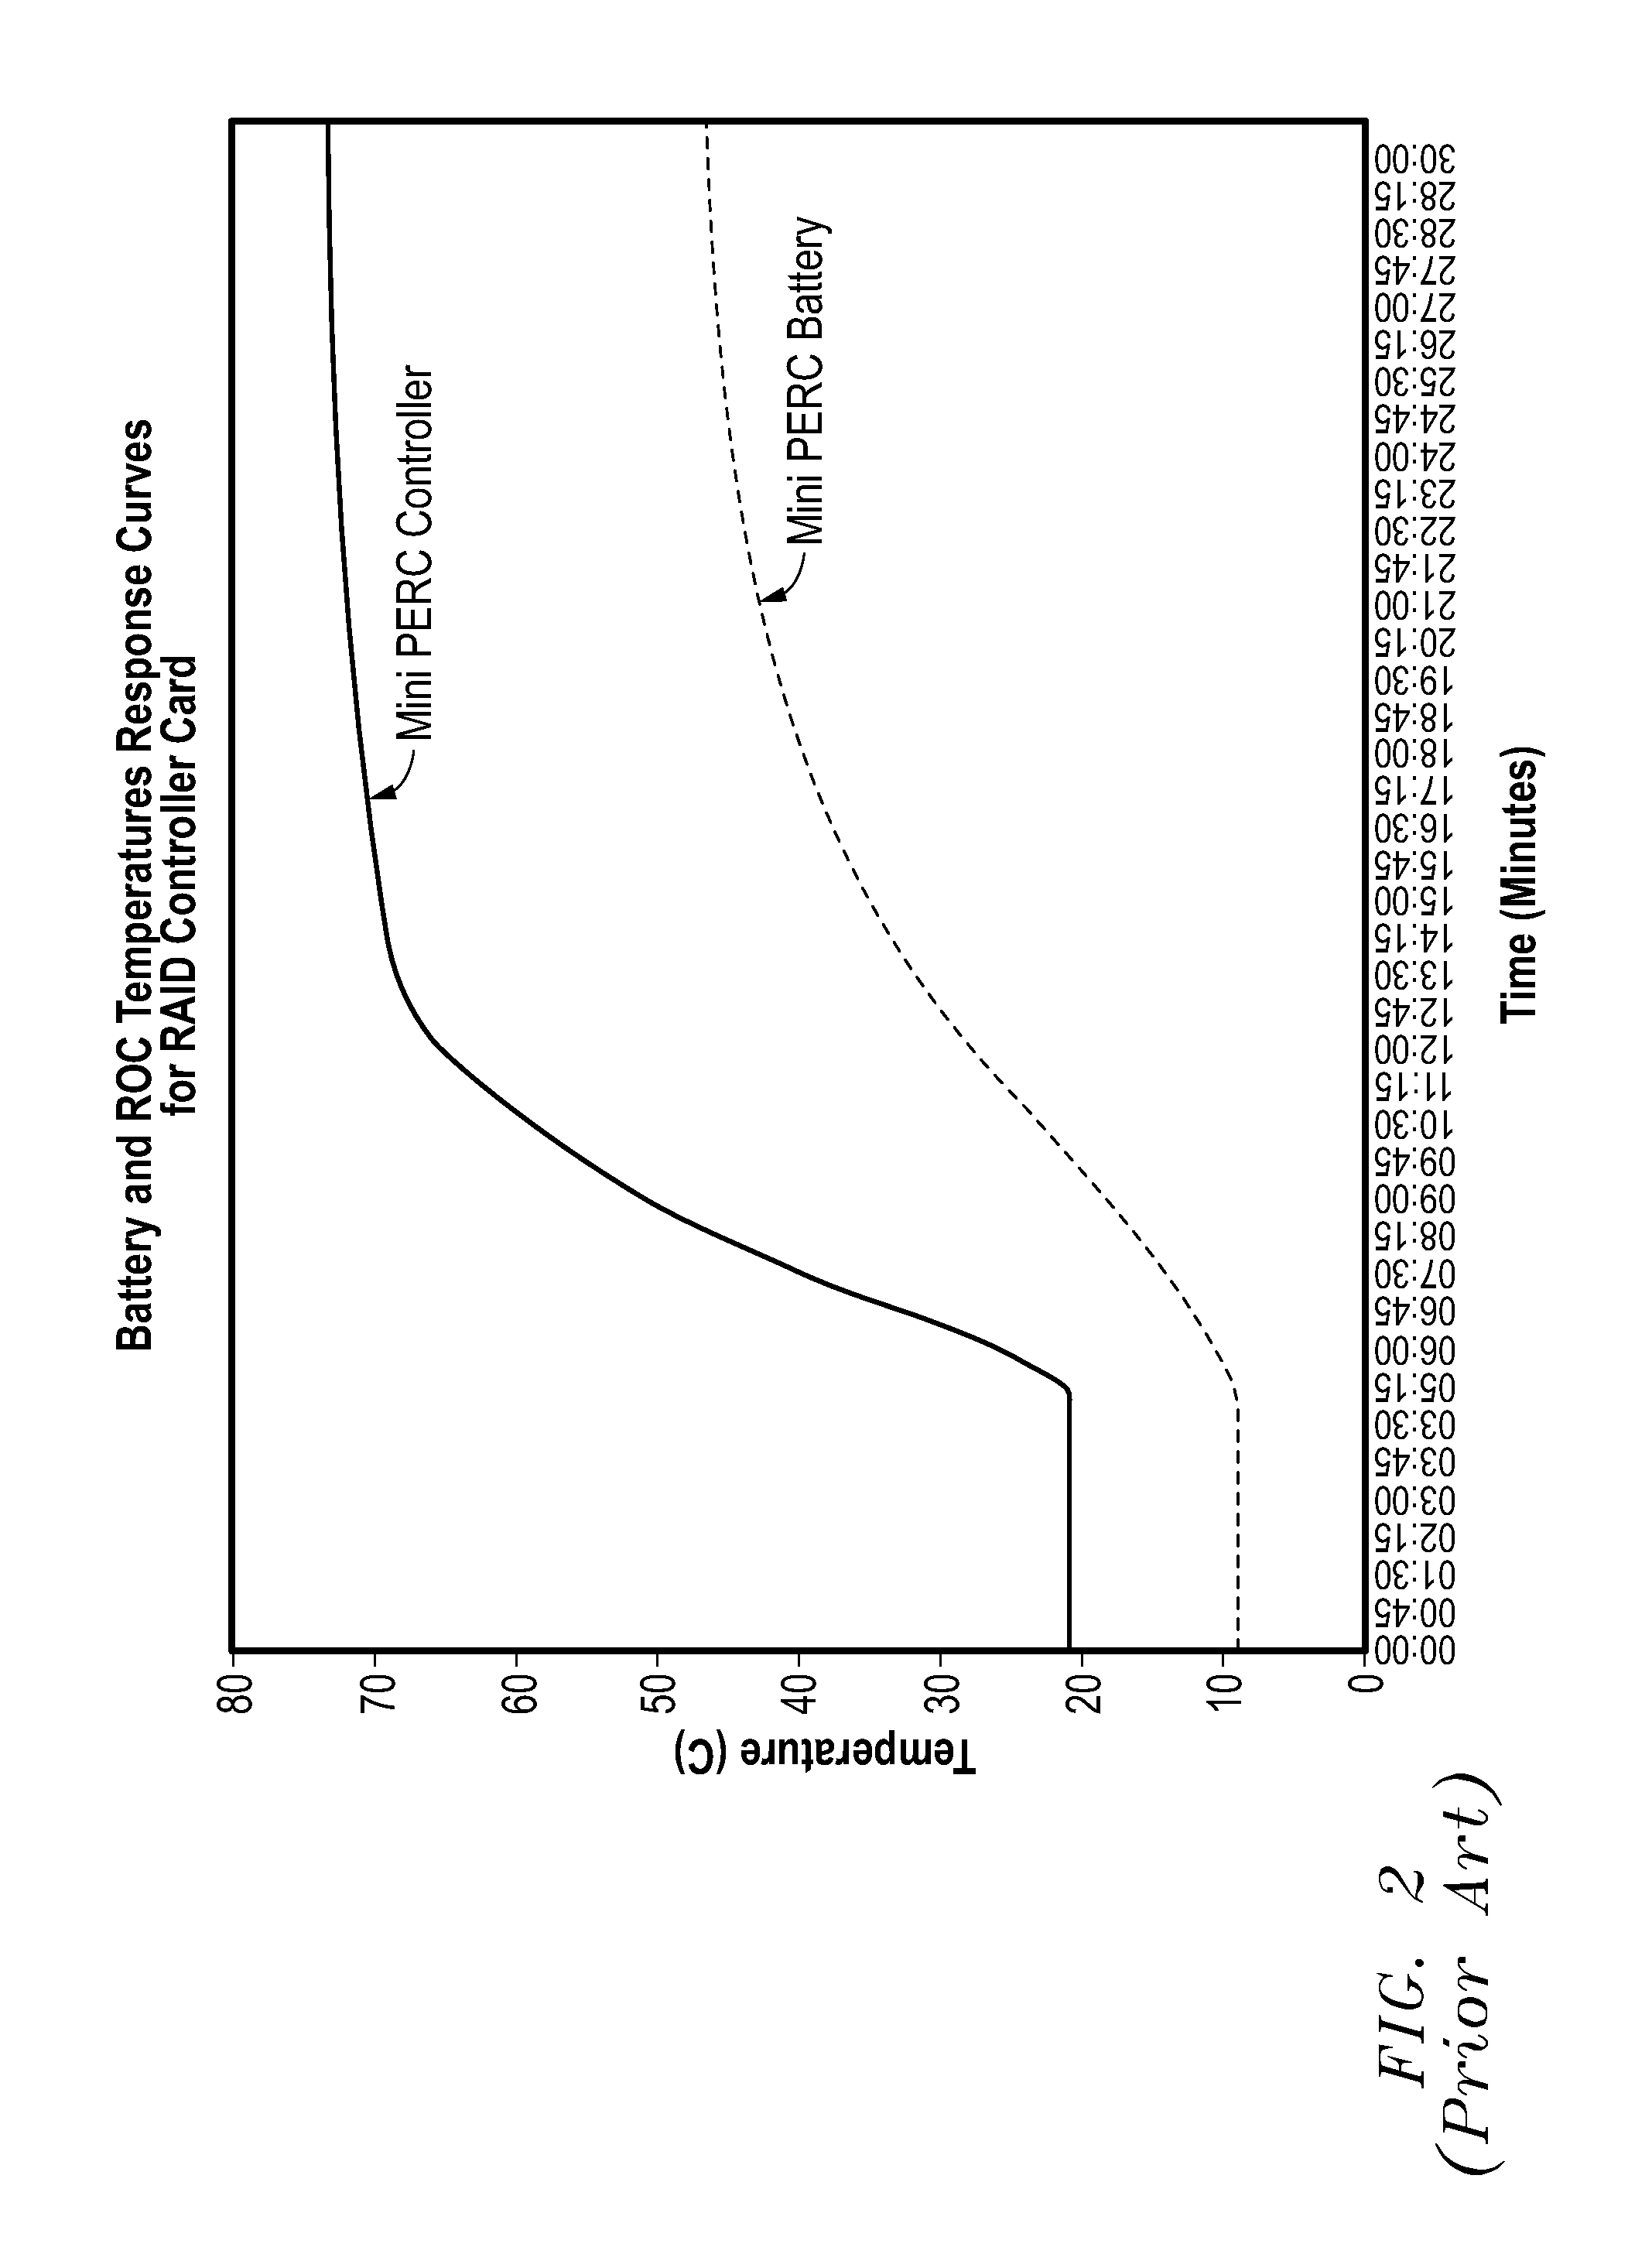 Thermal control systems and methods for information handling systems